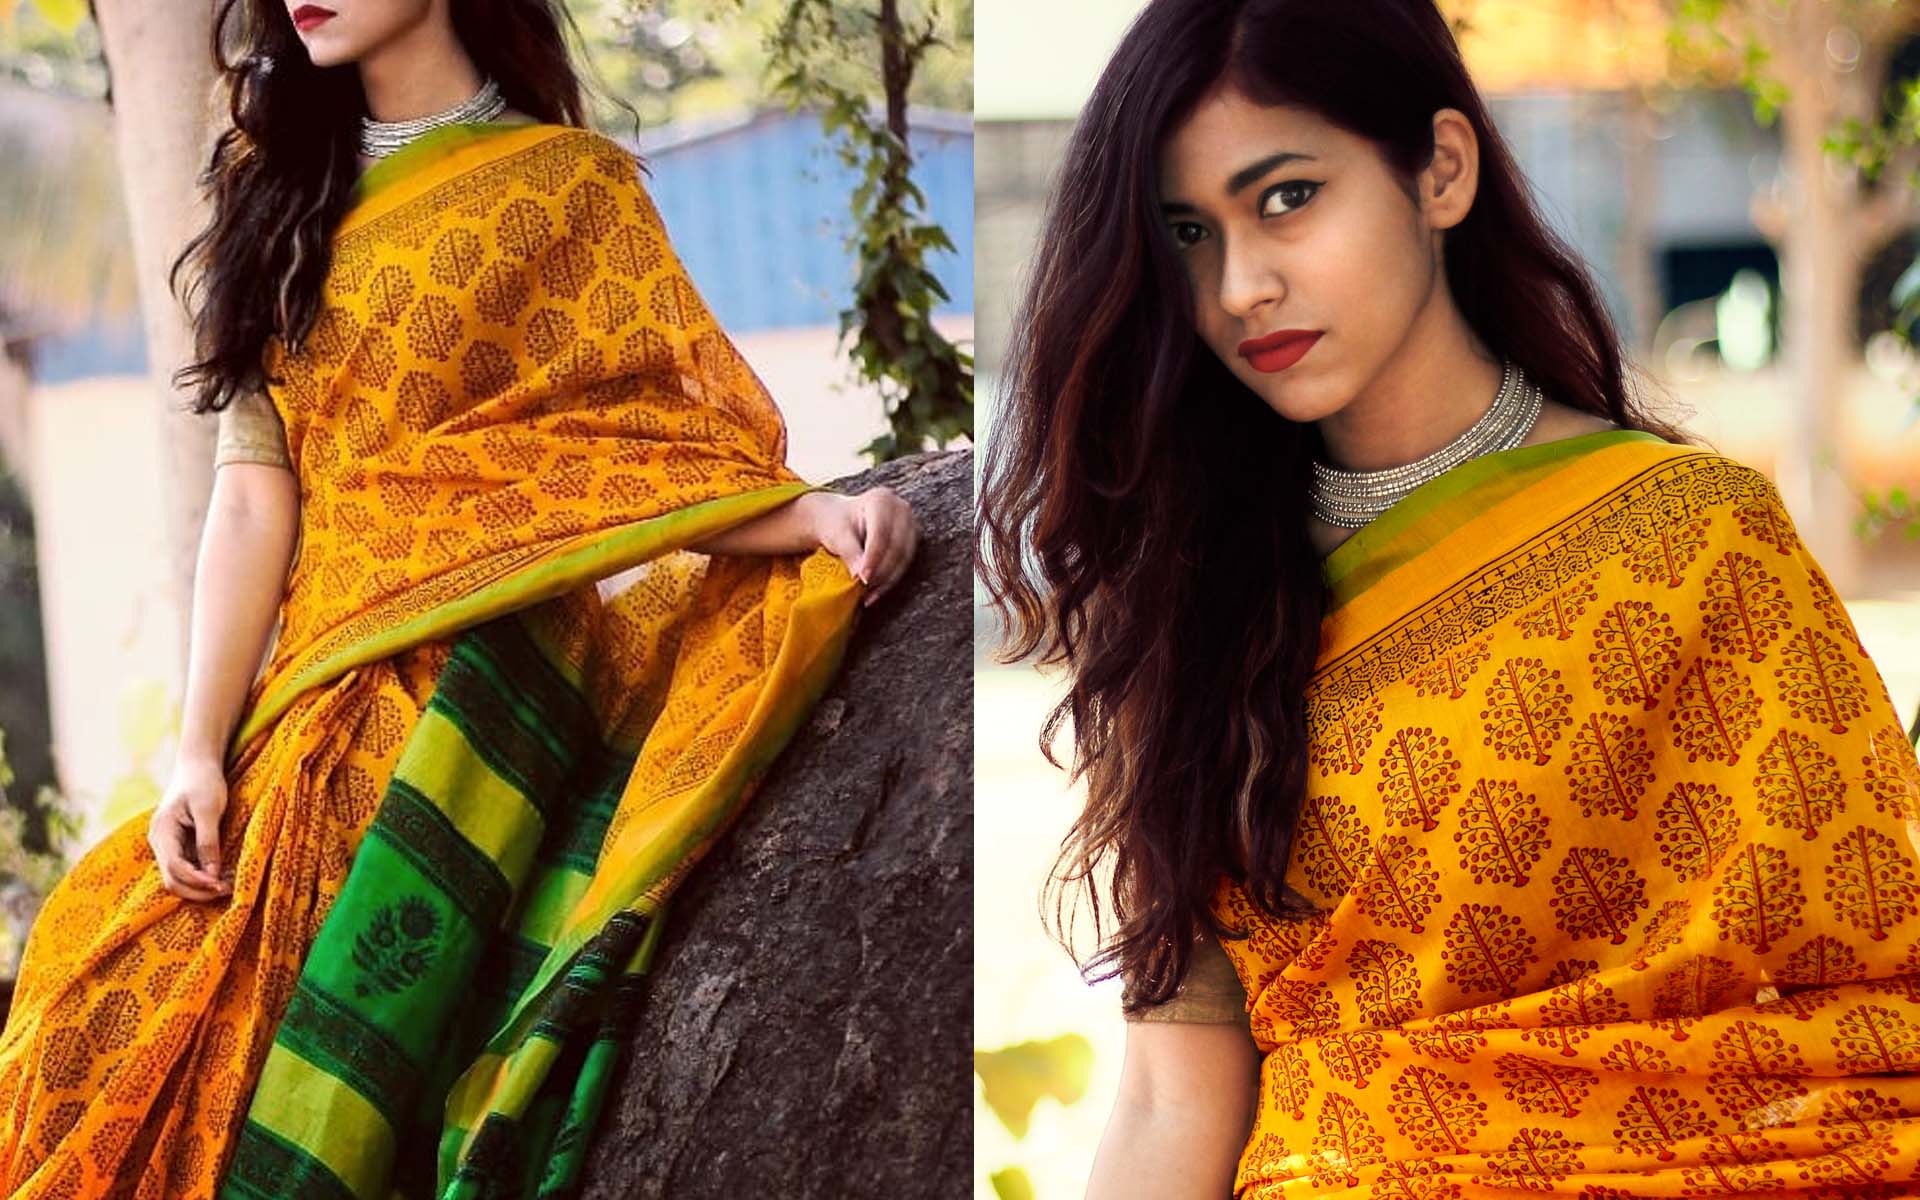 For All The Saree Lovers - Dwell into the Magic of Rajasthani Hand Block Prints on Rich South Indian Pattu’s